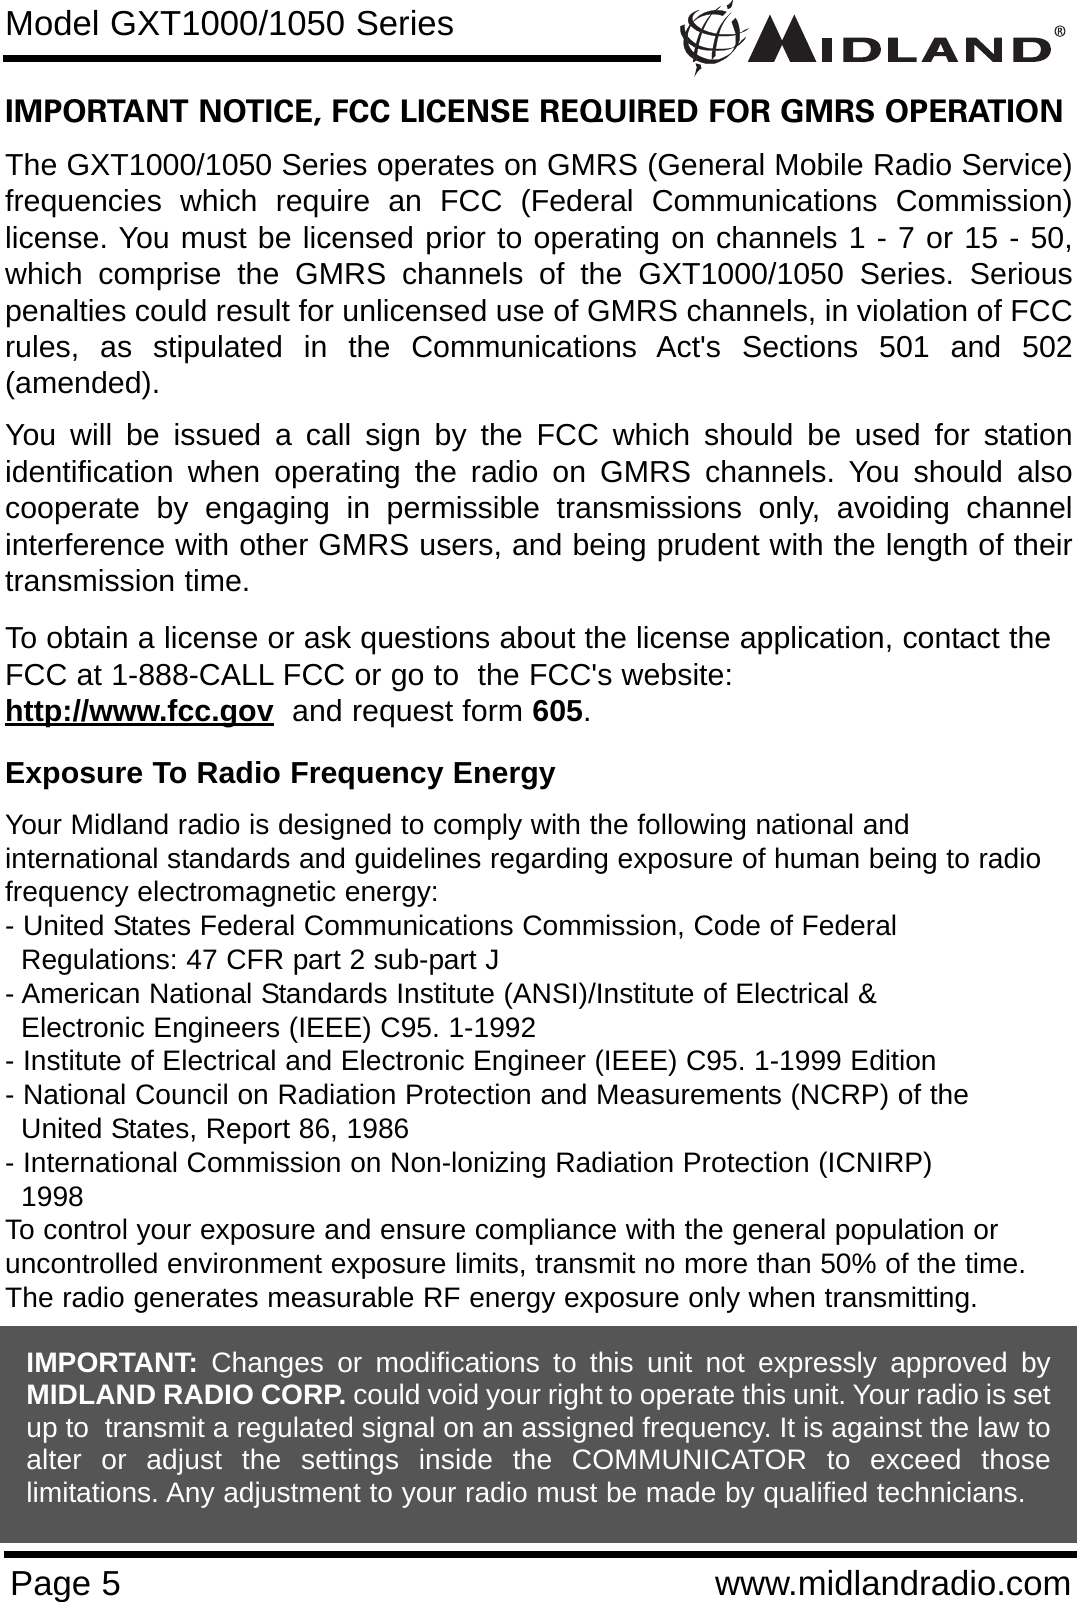 Page 5 www.midlandradio.comIMPORTANT NOTICE, FCC LICENSE REQUIRED FOR GMRS OPERATIONThe GXT1000/1050 Series operates on GMRS (General Mobile Radio Service)frequencies which require an FCC (Federal Communications Commission)license. You must be licensed prior to operating on channels 1 - 7 or 15 - 50,which comprise the GMRS channels of the GXT1000/1050 Series. Seriouspenalties could result for unlicensed use of GMRS channels, in violation of FCCrules, as stipulated in the Communications Act&apos;s Sections 501 and 502(amended).You will be issued a call sign by the FCC which should be used for stationidentification when operating the radio on GMRS channels. You should alsocooperate by engaging in permissible transmissions only, avoiding channelinterference with other GMRS users, and being prudent with the length of theirtransmission time.To obtain a license or ask questions about the license application, contact theFCC at 1-888-CALL FCC or go to  the FCC&apos;s website:  http://www.fcc.gov and request form 605.Exposure To Radio Frequency EnergyYour Midland radio is designed to comply with the following national and international standards and guidelines regarding exposure of human being to radiofrequency electromagnetic energy:- United States Federal Communications Commission, Code of Federal Regulations: 47 CFR part 2 sub-part J- American National Standards Institute (ANSI)/Institute of Electrical &amp; Electronic Engineers (IEEE) C95. 1-1992- Institute of Electrical and Electronic Engineer (IEEE) C95. 1-1999 Edition- National Council on Radiation Protection and Measurements (NCRP) of the United States, Report 86, 1986- International Commission on Non-lonizing Radiation Protection (ICNIRP) 1998To control your exposure and ensure compliance with the general population oruncontrolled environment exposure limits, transmit no more than 50% of the time.The radio generates measurable RF energy exposure only when transmitting.Model GXT1000/1050 SeriesIMPORTANT: Changes or modifications to this unit not expressly approved byMIDLAND RADIO CORP. could void your right to operate this unit. Your radio is setup to  transmit a regulated signal on an assigned frequency. It is against the law toalter or adjust the settings inside the COMMUNICATOR to exceed thoselimitations. Any adjustment to your radio must be made by qualified technicians.